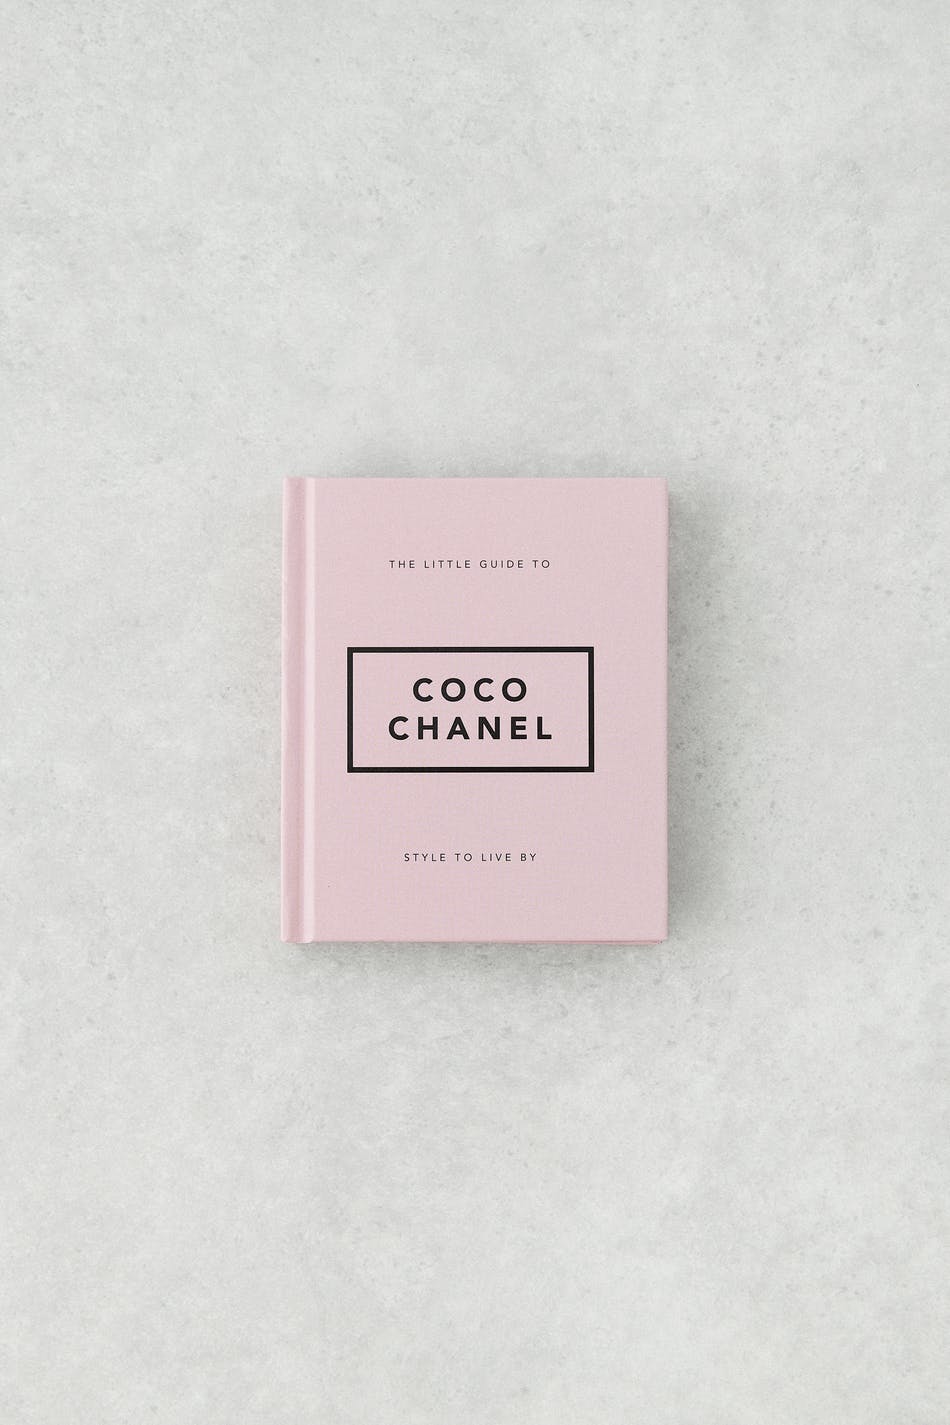 New mags Coco Chanel book